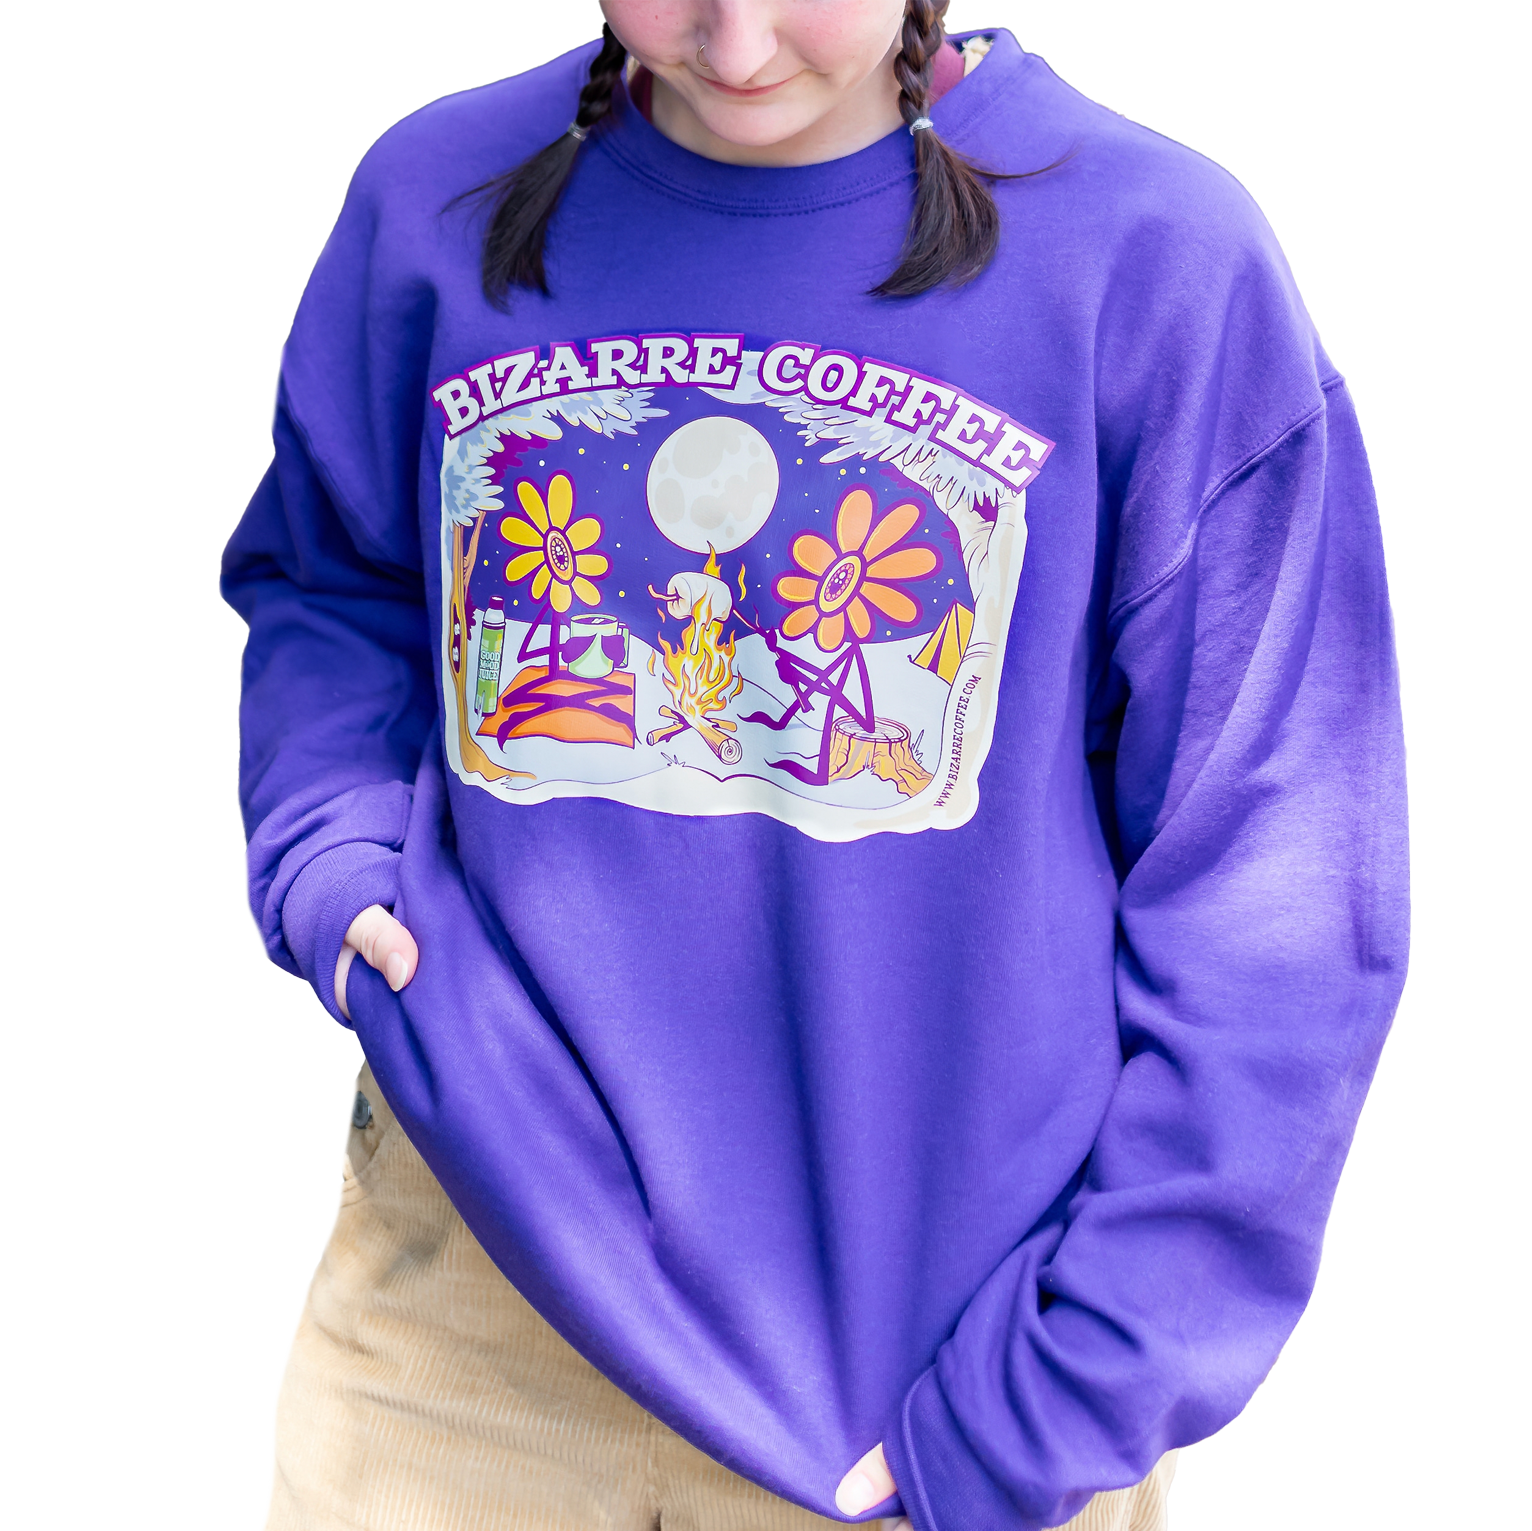 A Bizarre Coffee purple crewneck sweater with a campfire design featuring two flowers roasting marshmallows and sipping coffee.